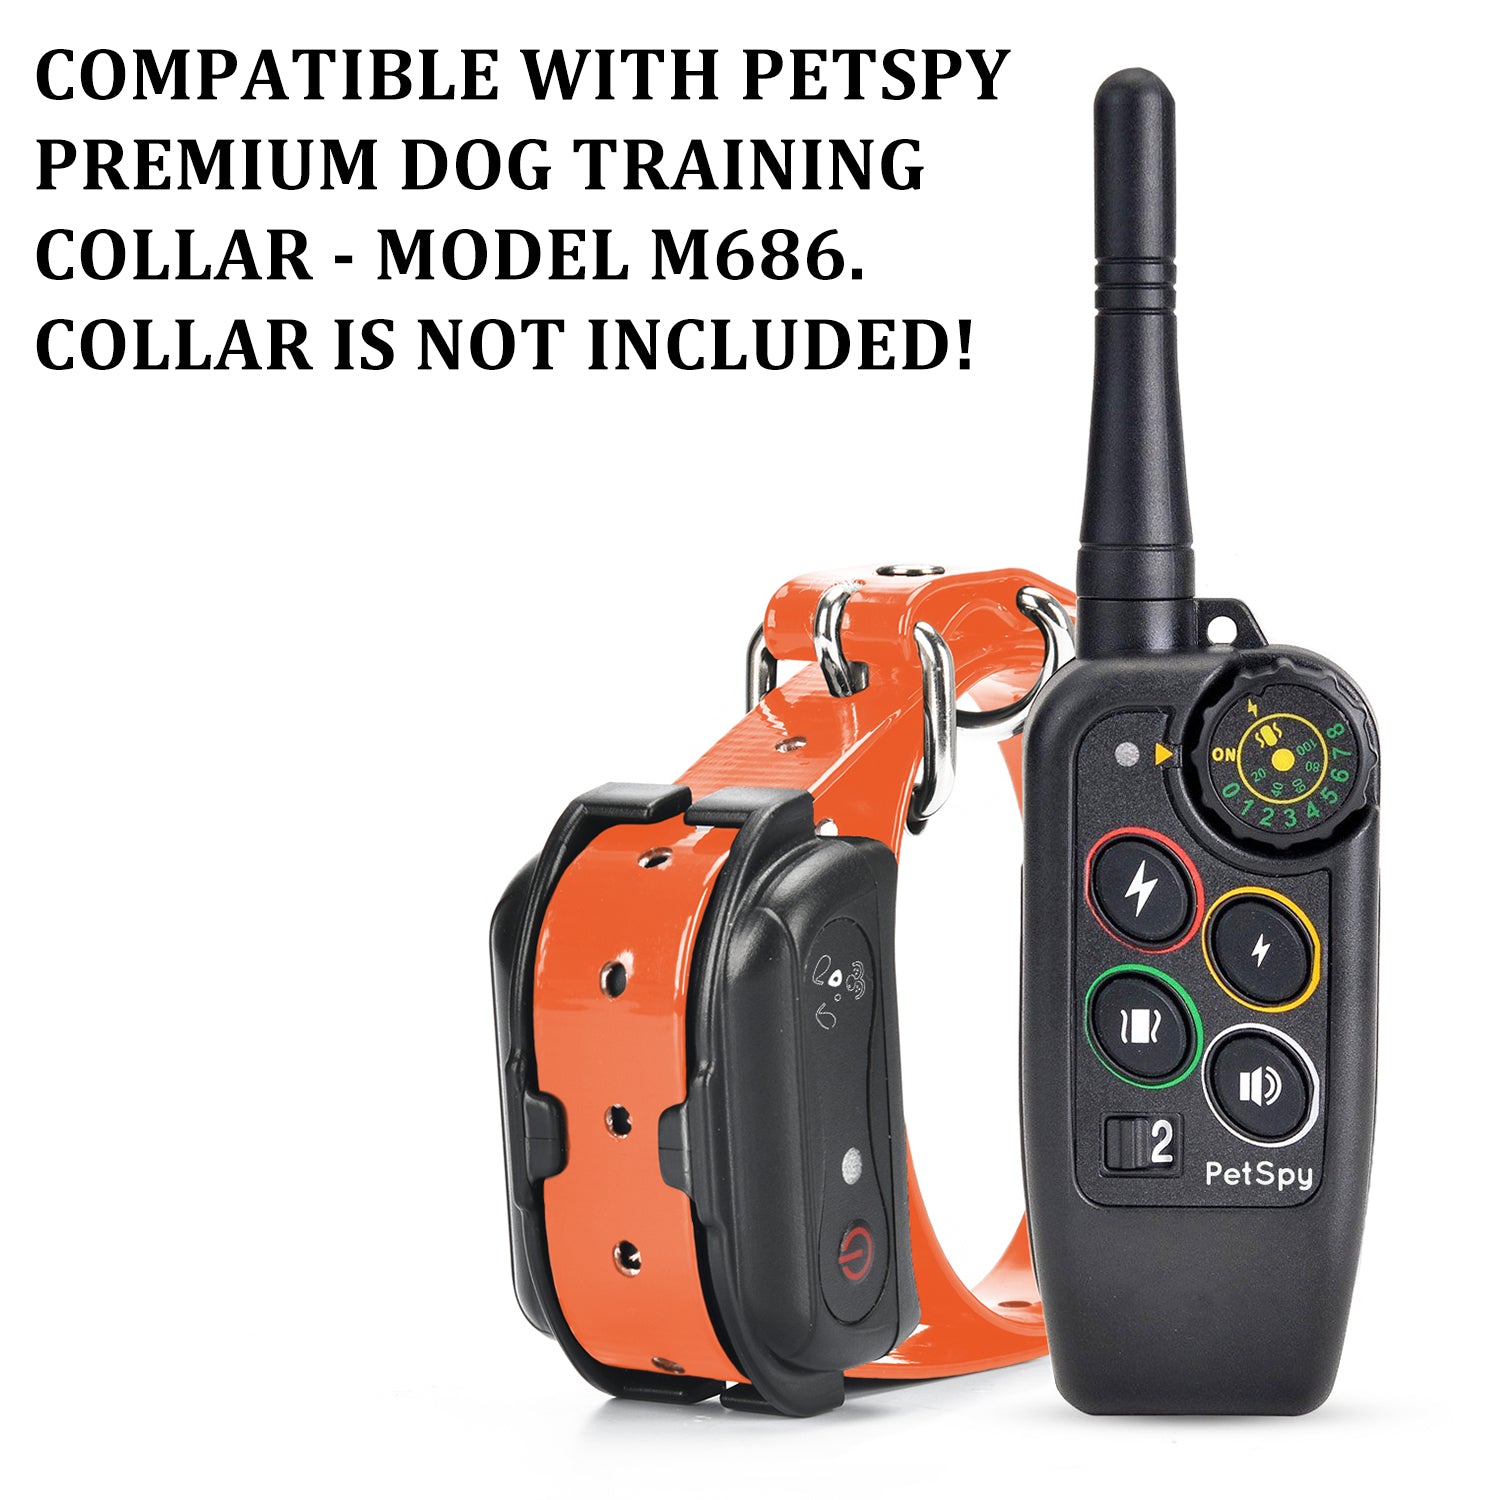 M686 Extra Remote Transmitter_compatible with petspy premium dog training collar 